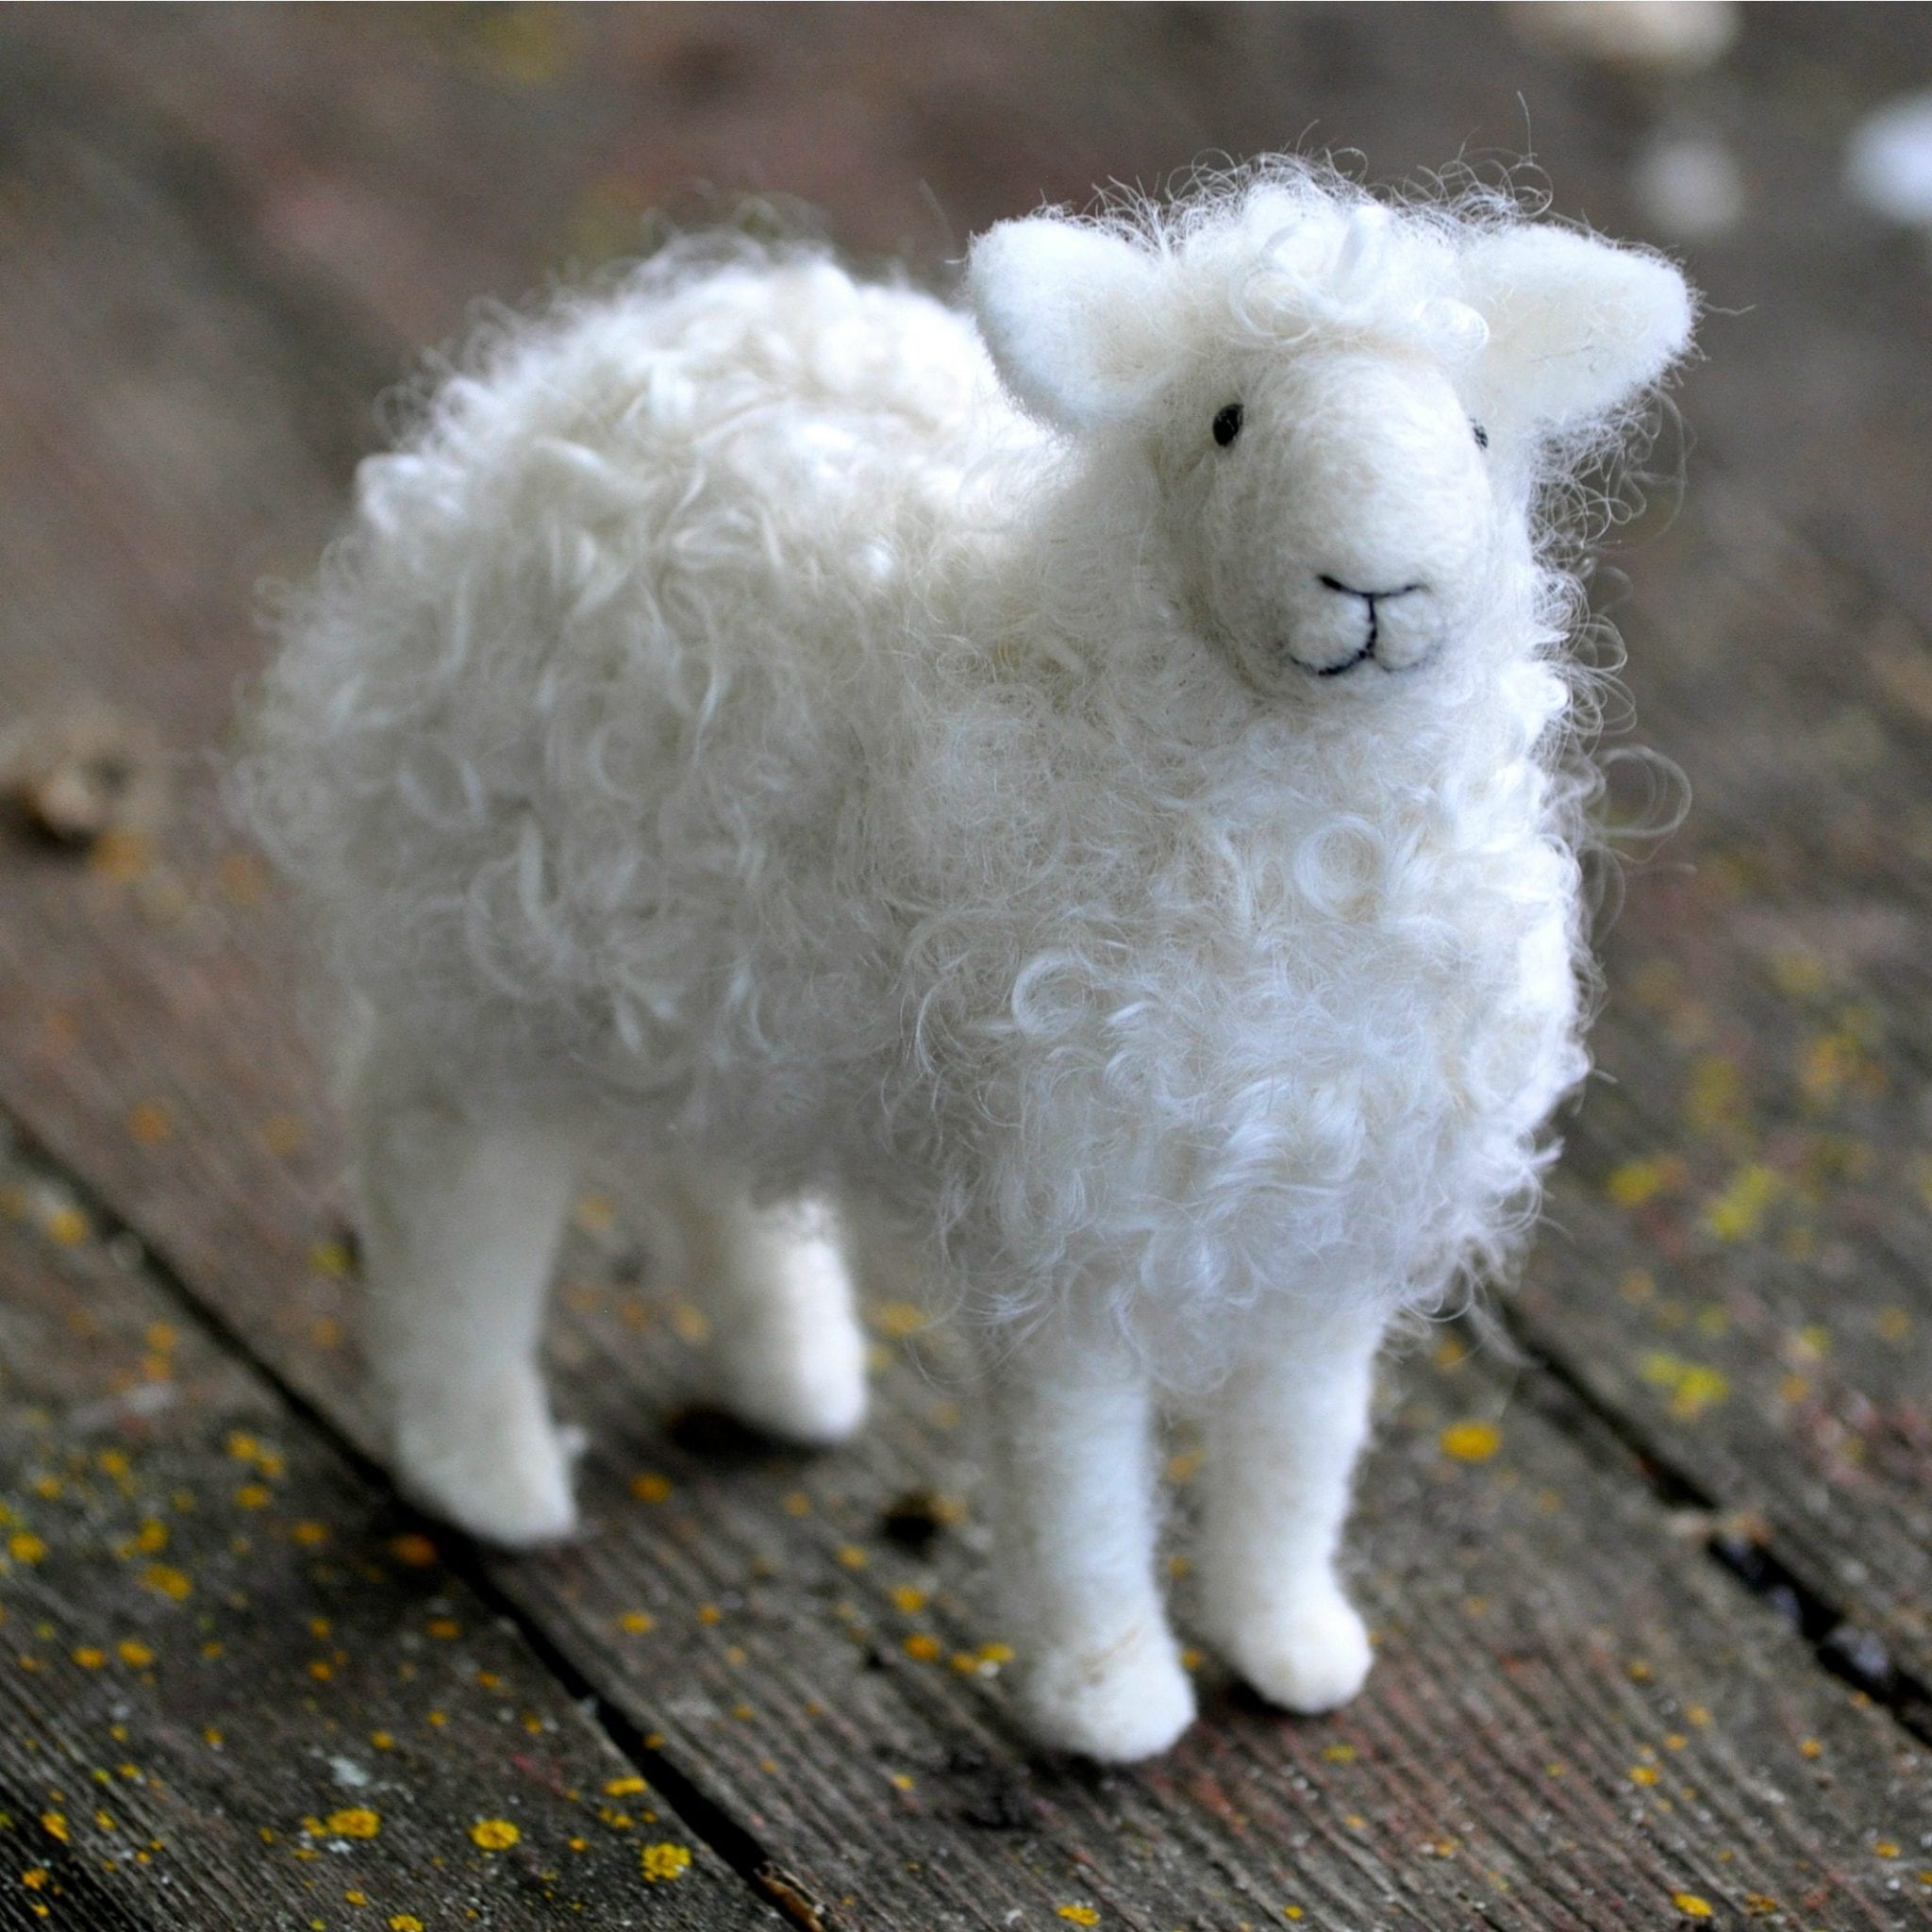 Needle Felting 101 – With His Grace